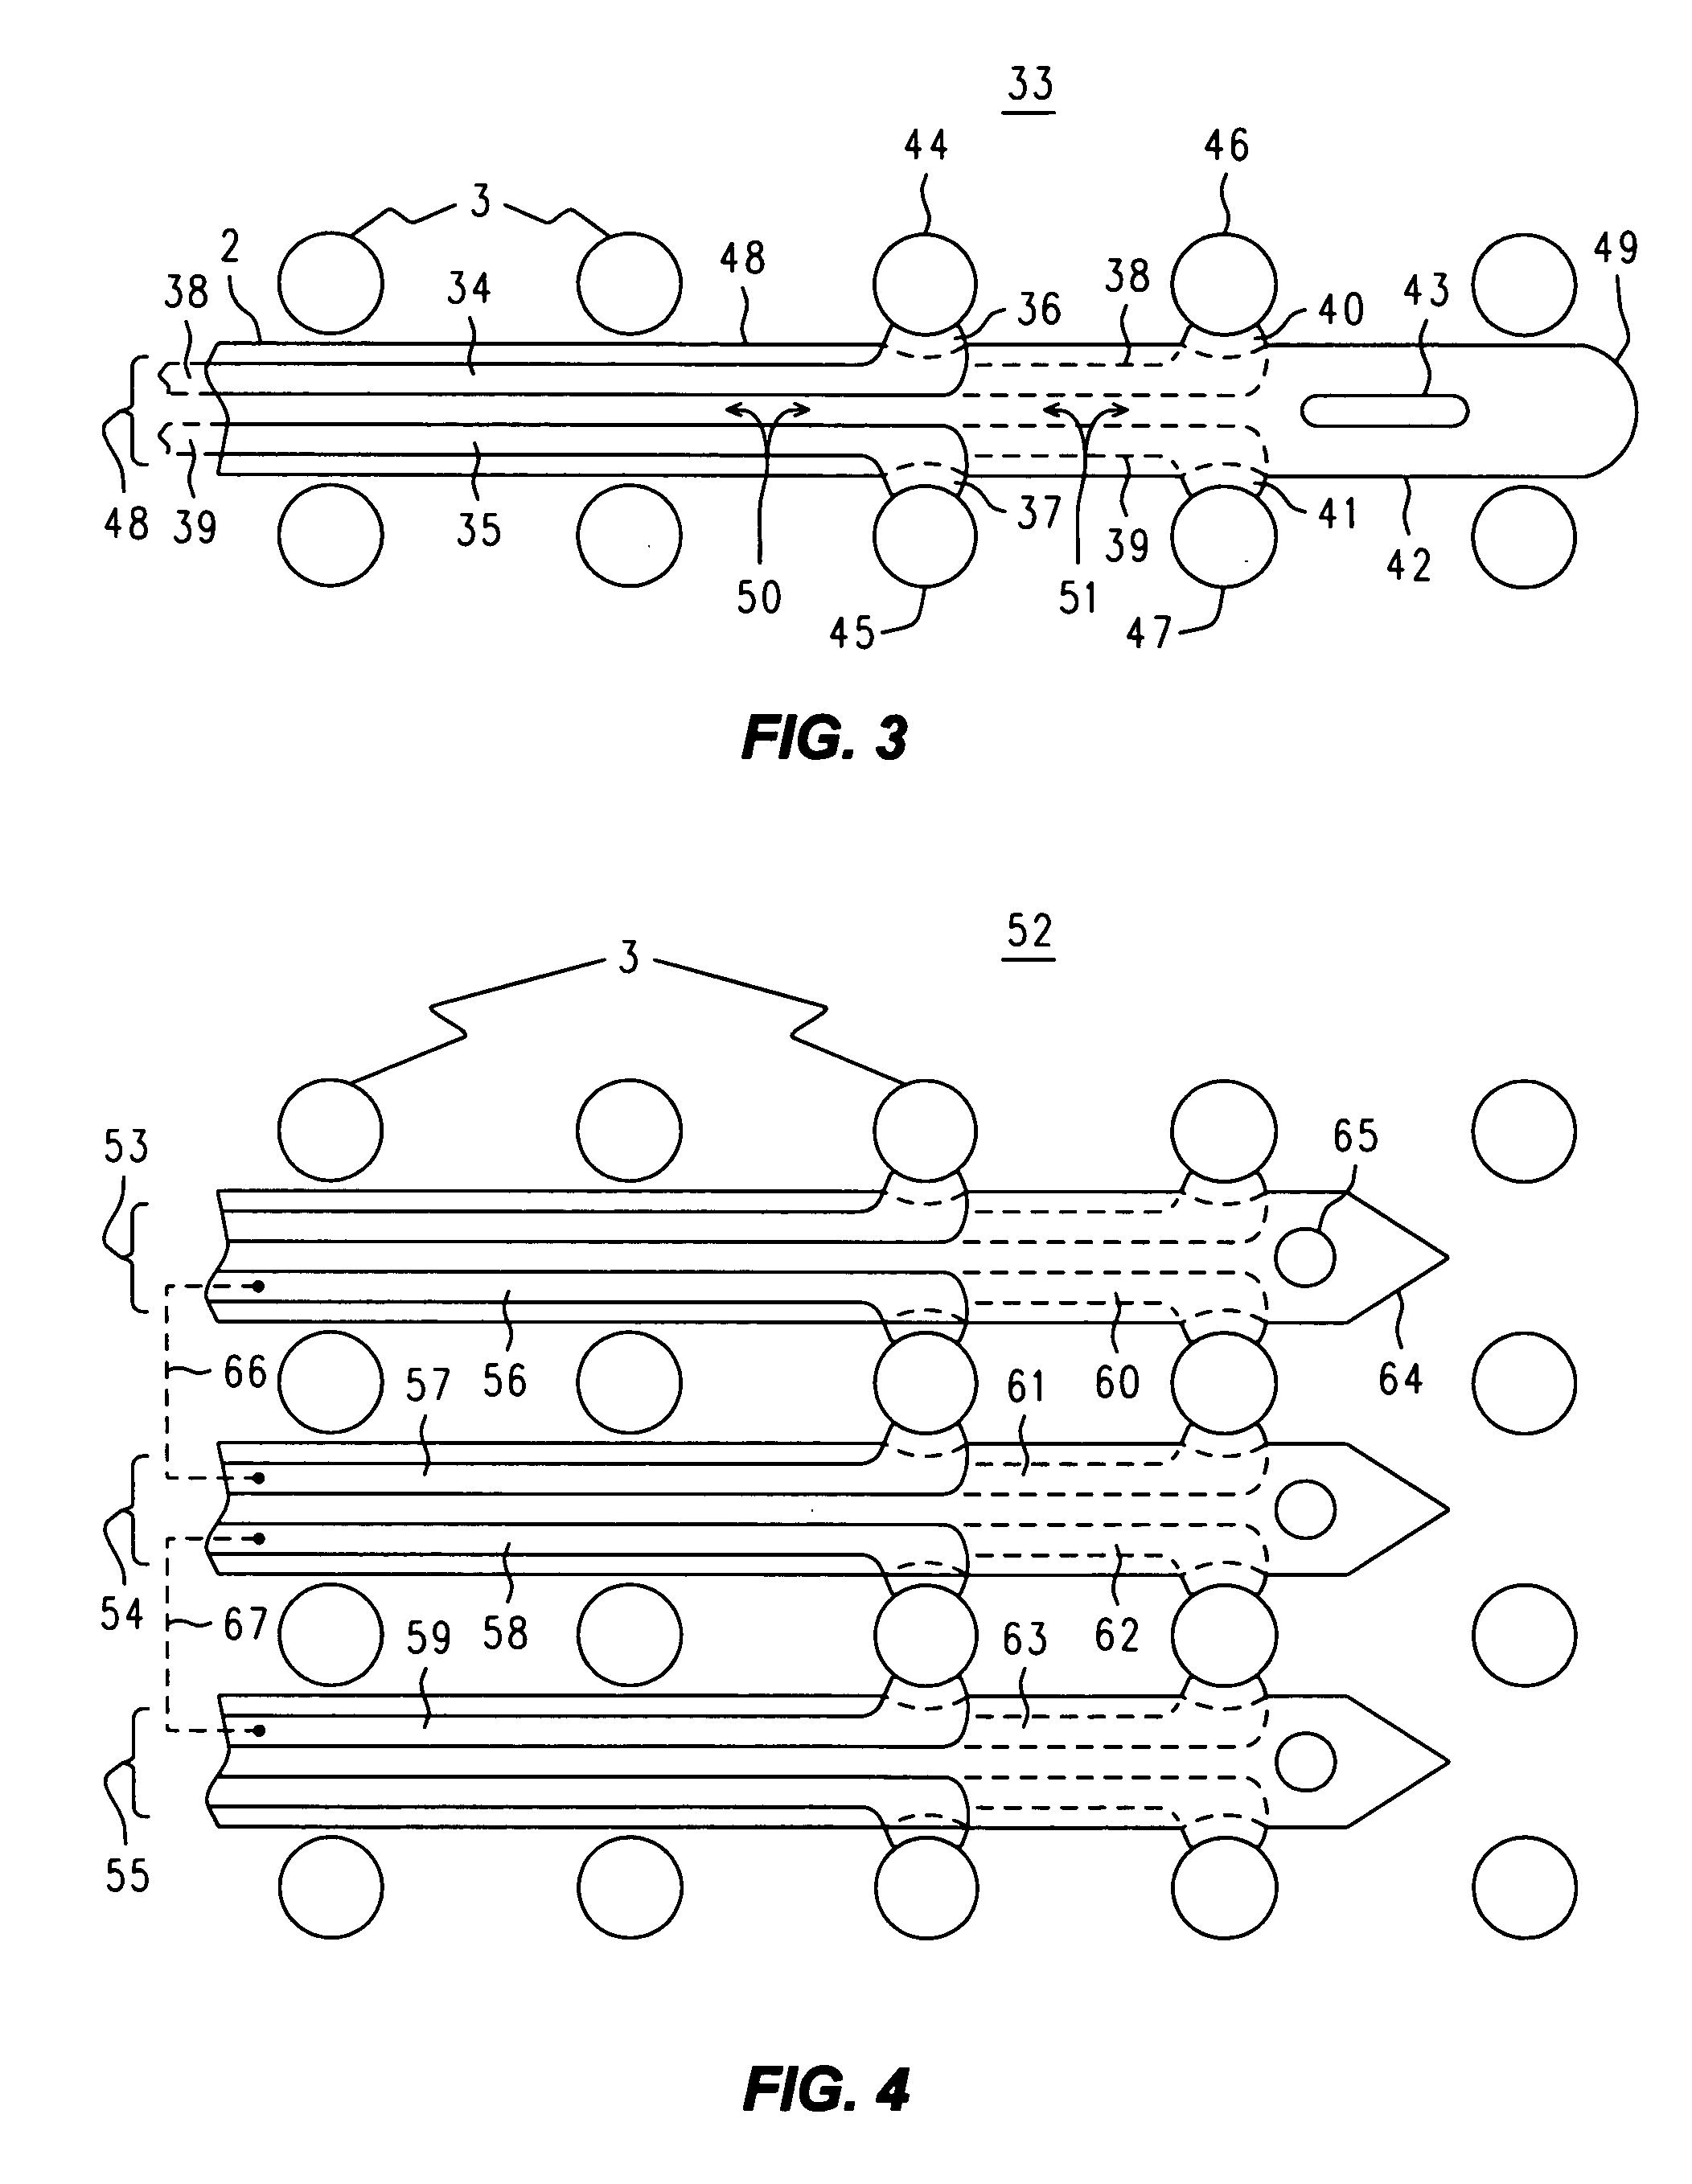 Method and apparatus for probing at arbitrary locations within an inaccessible array of leads the solder balls or pins actually connecting a VLSI IC package to a substrate or socket